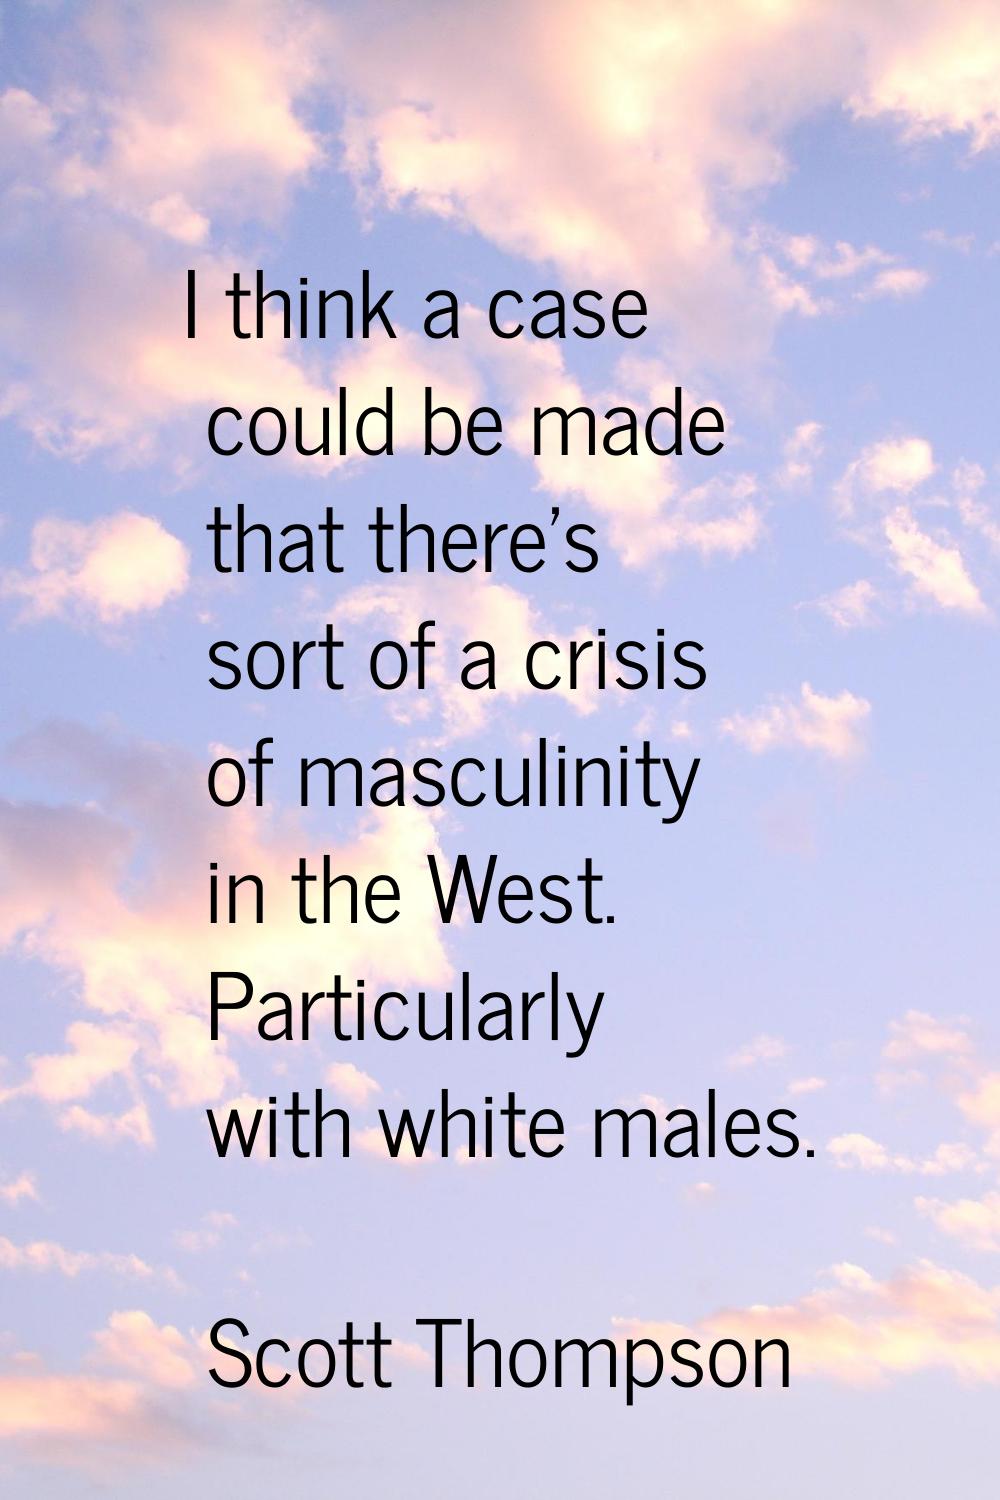 I think a case could be made that there's sort of a crisis of masculinity in the West. Particularly